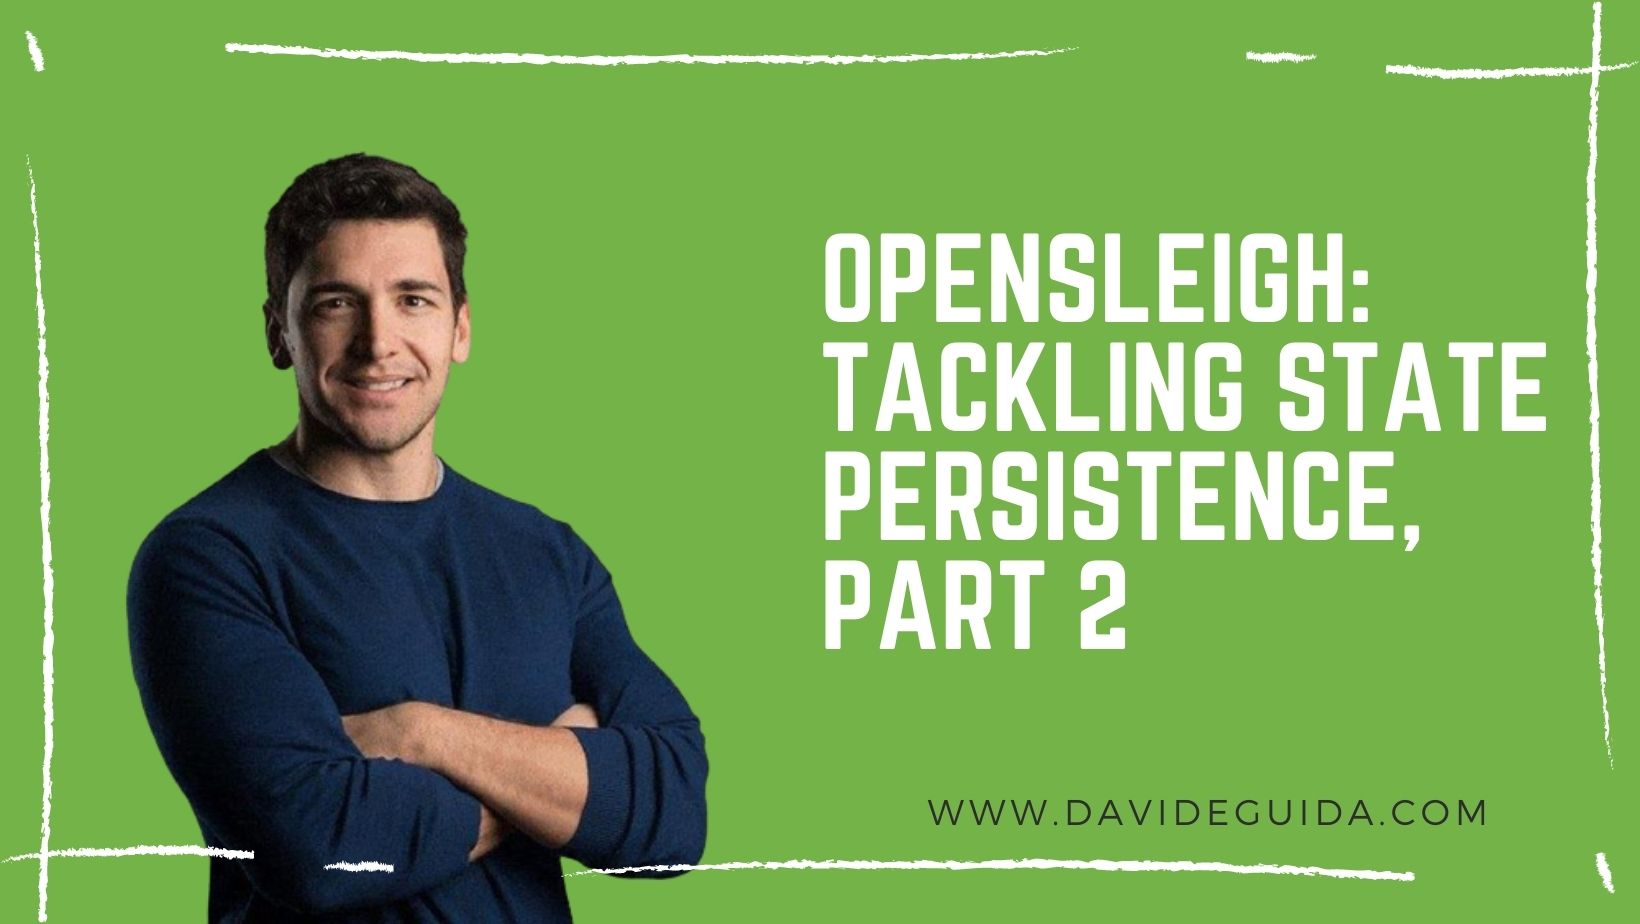 OpenSleigh: tackling state persistence, part 2